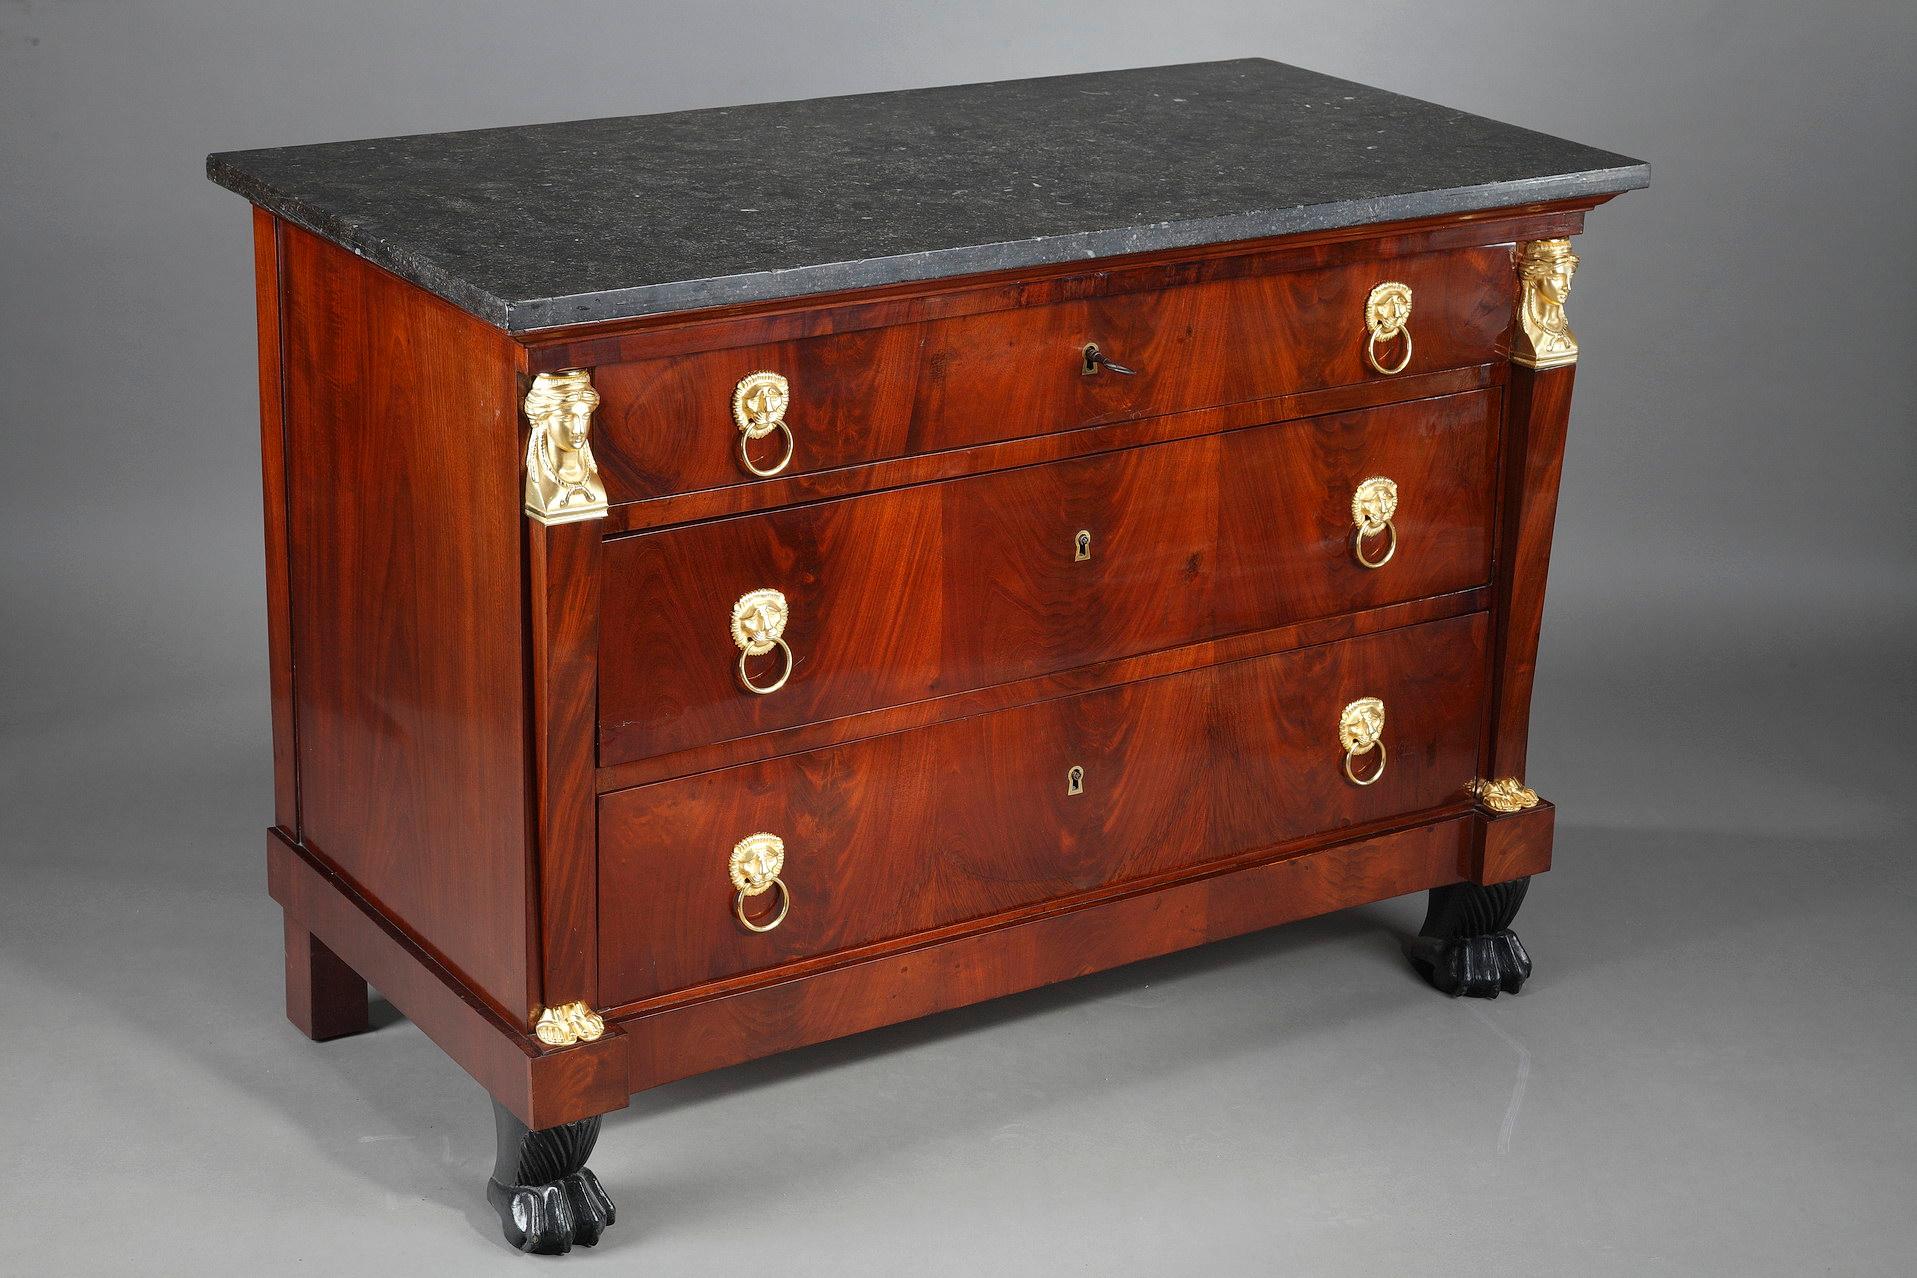 Empire mahogany and mahogany veneer commode opening with three drawers adorned with drop handles in the form of bullheads. On either side of the commode, the pilaster are decorated with busts of Athenians and chased gilt bronze feet, and rest on